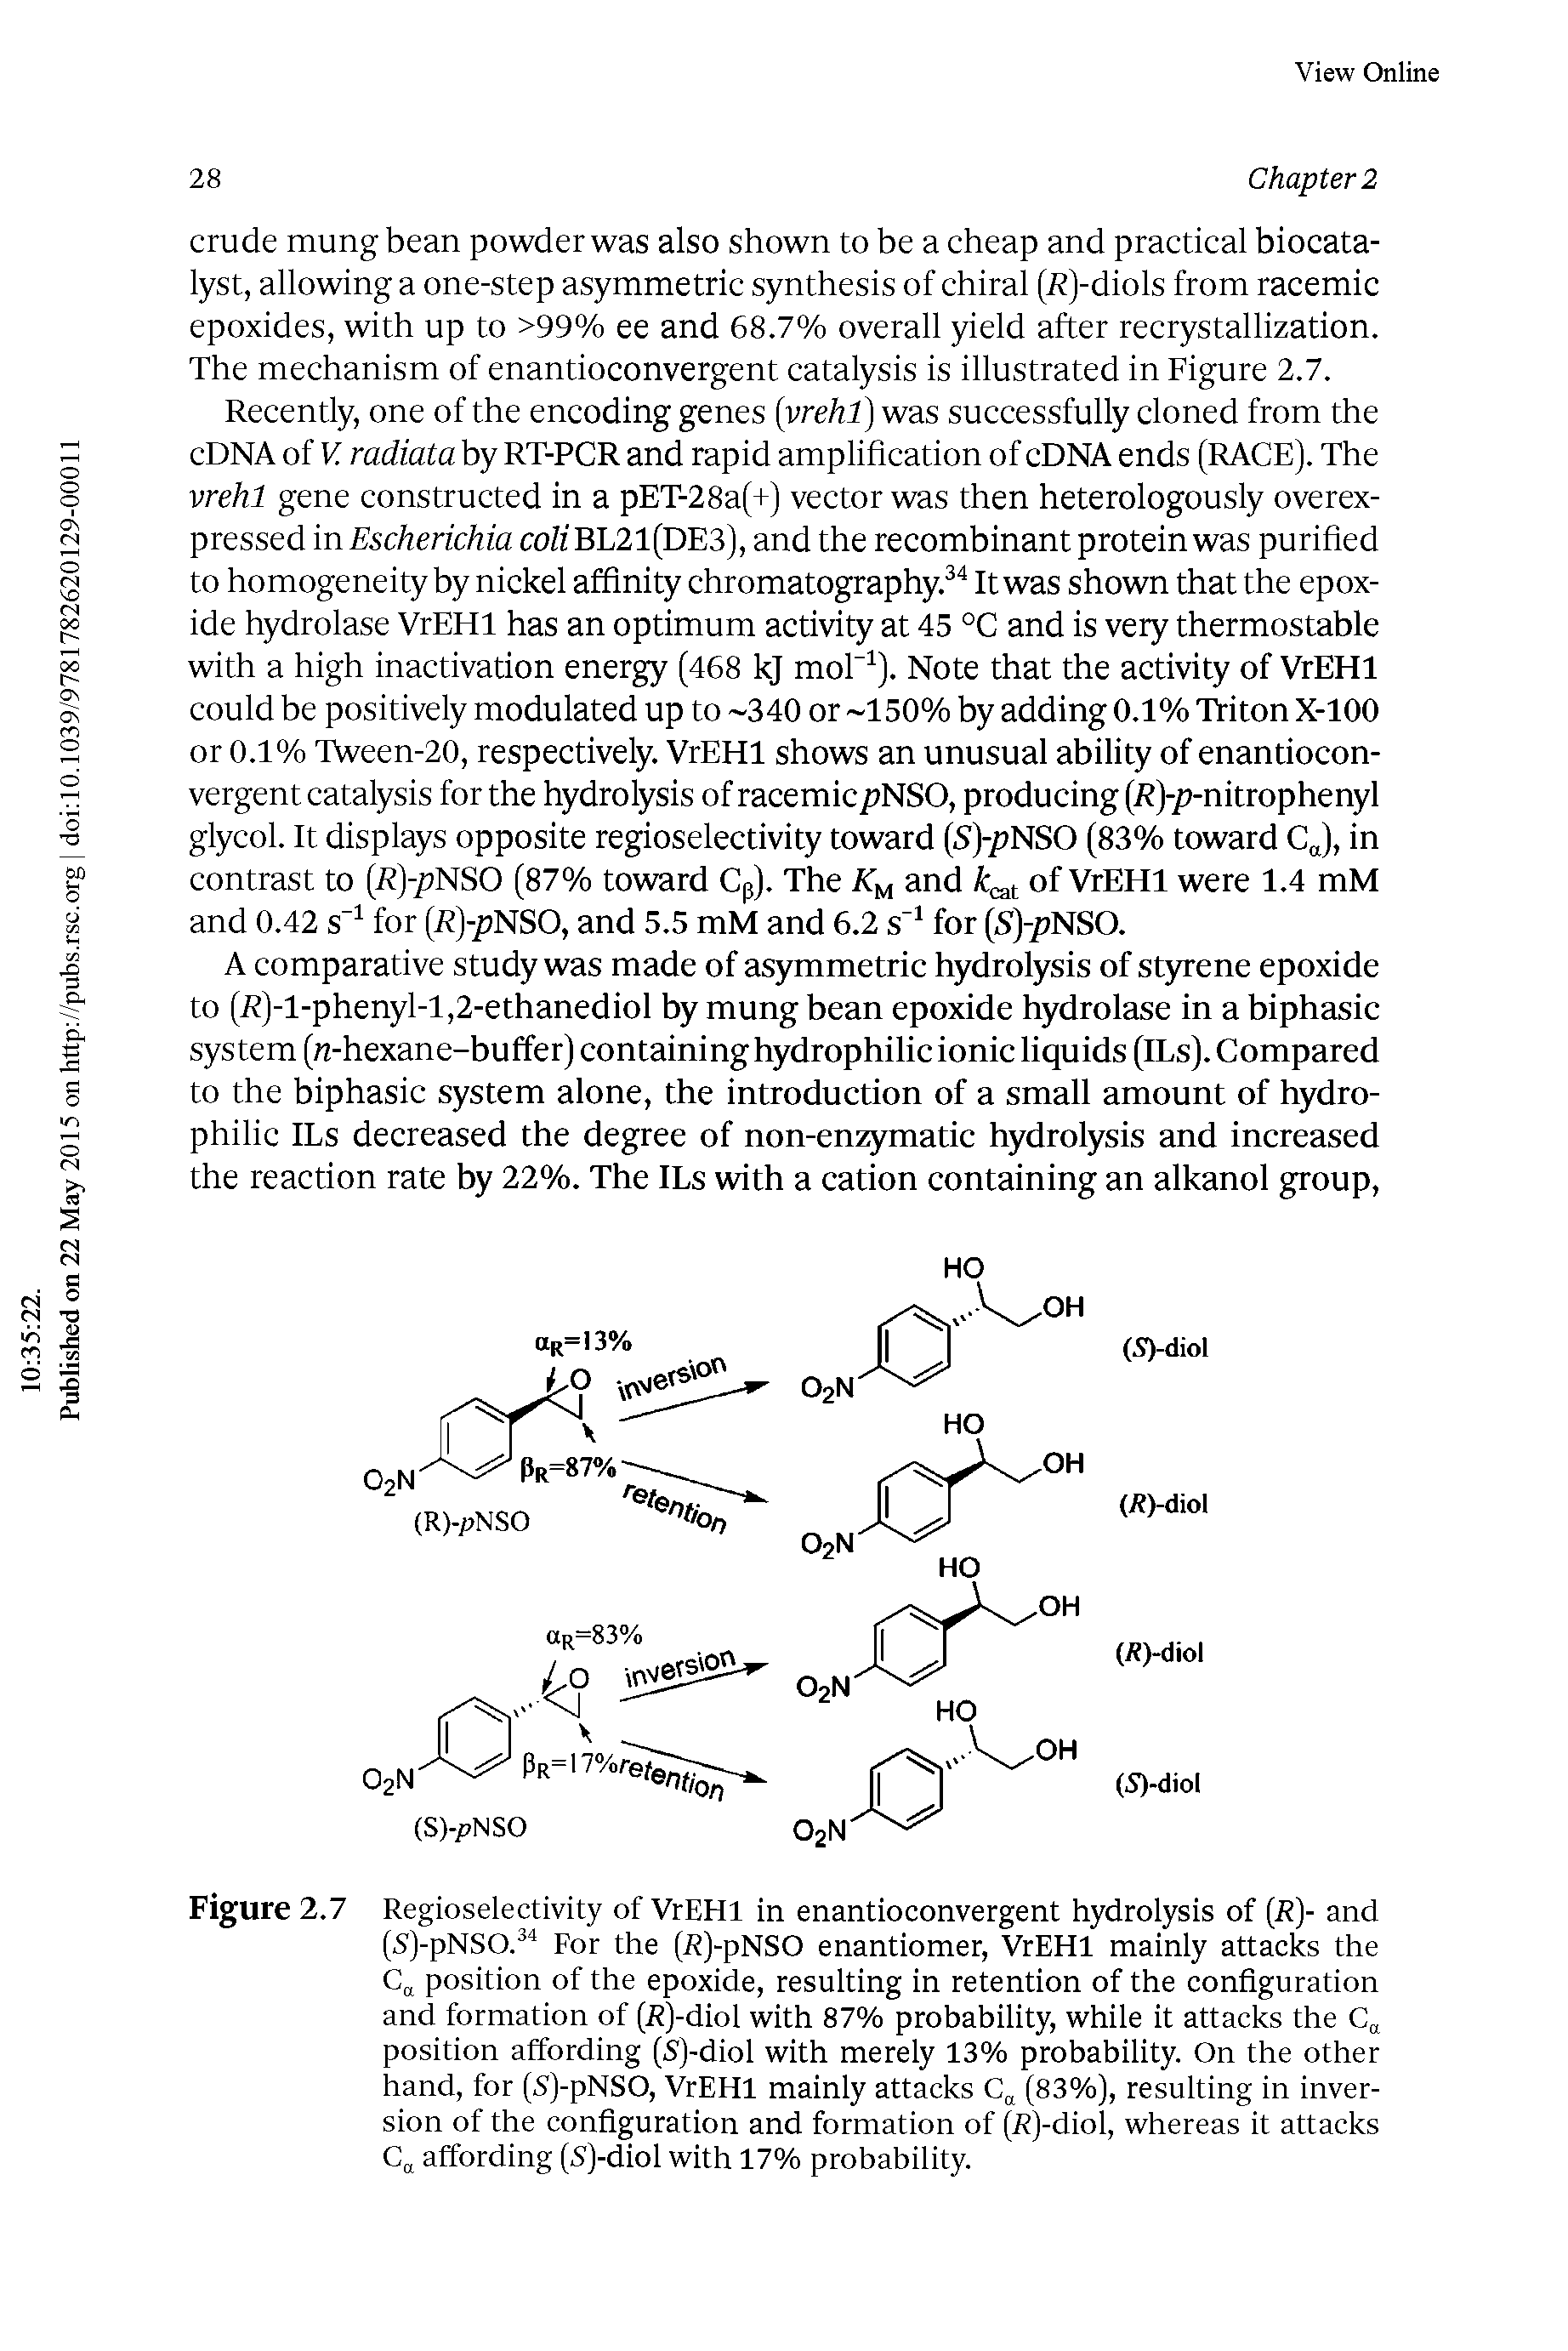 Figure 2.7 Regioselectivity of VrEHl in enantioconvergent hydrolysis of (R)- and (S )-pNSO. For the (R)-pNSO enantiomer, VrEHl mainly attacks the Cj, position of the epoxide, resulting in retention of the configuration and formation of (R)-diol with 87% probability, while it attacks the position affording (S)-diol with merely 13% probability. On the other hand, for (Sl-pNSO, VrEHl mainly attacks (83%), resulting in inversion of the configuration and formation of (R)-diol, whereas it attacks affording (S )-diol with 17% probability.